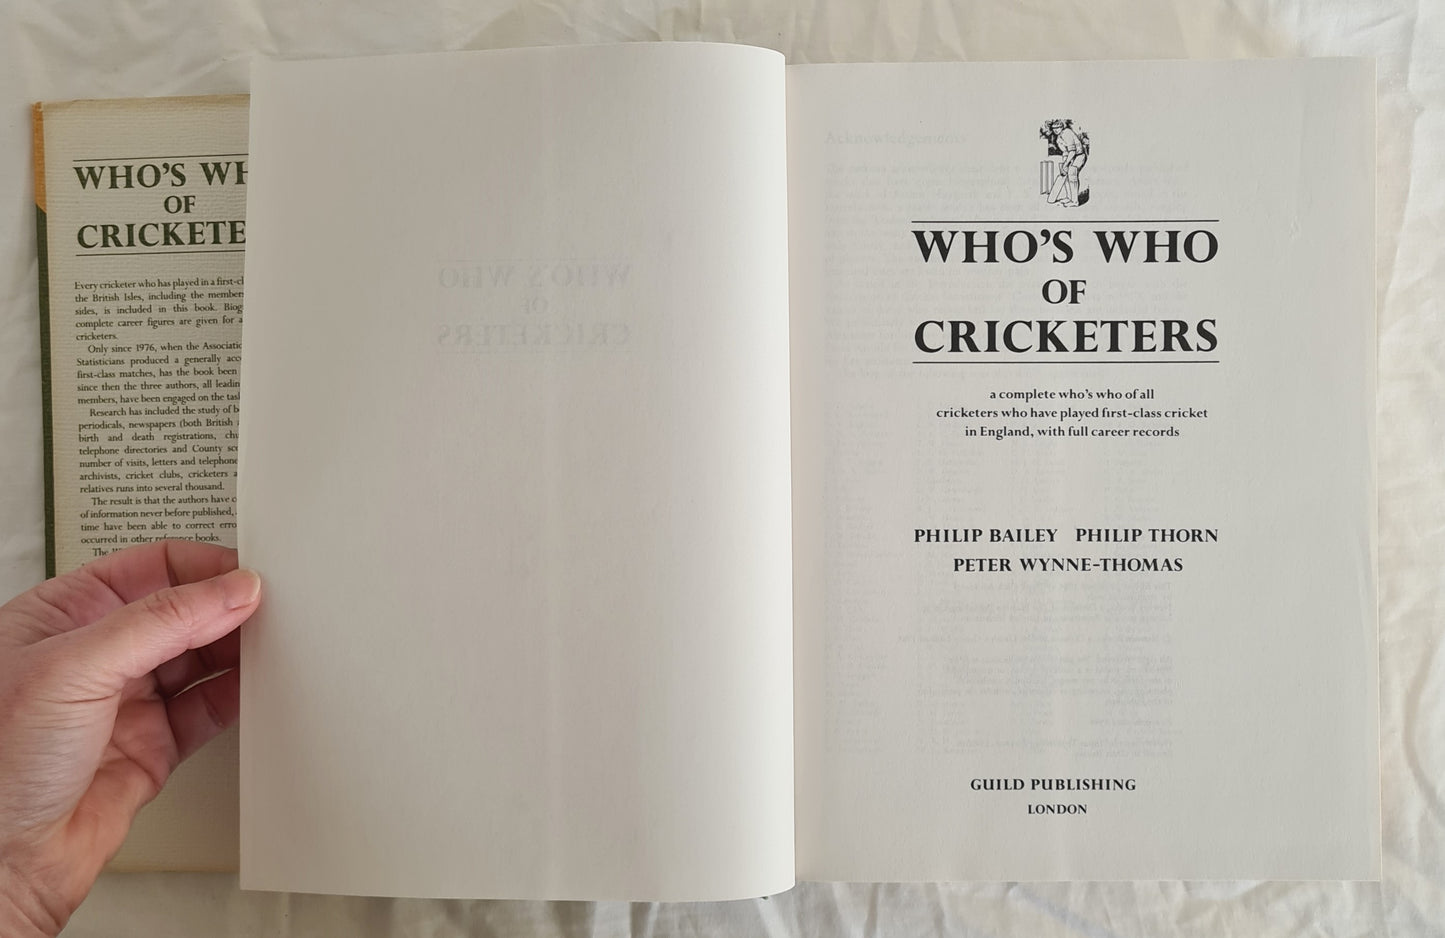 Who’s Who of Cricketers by Philip Bailey, Philip Thorn and Peter Wynne-Thomas